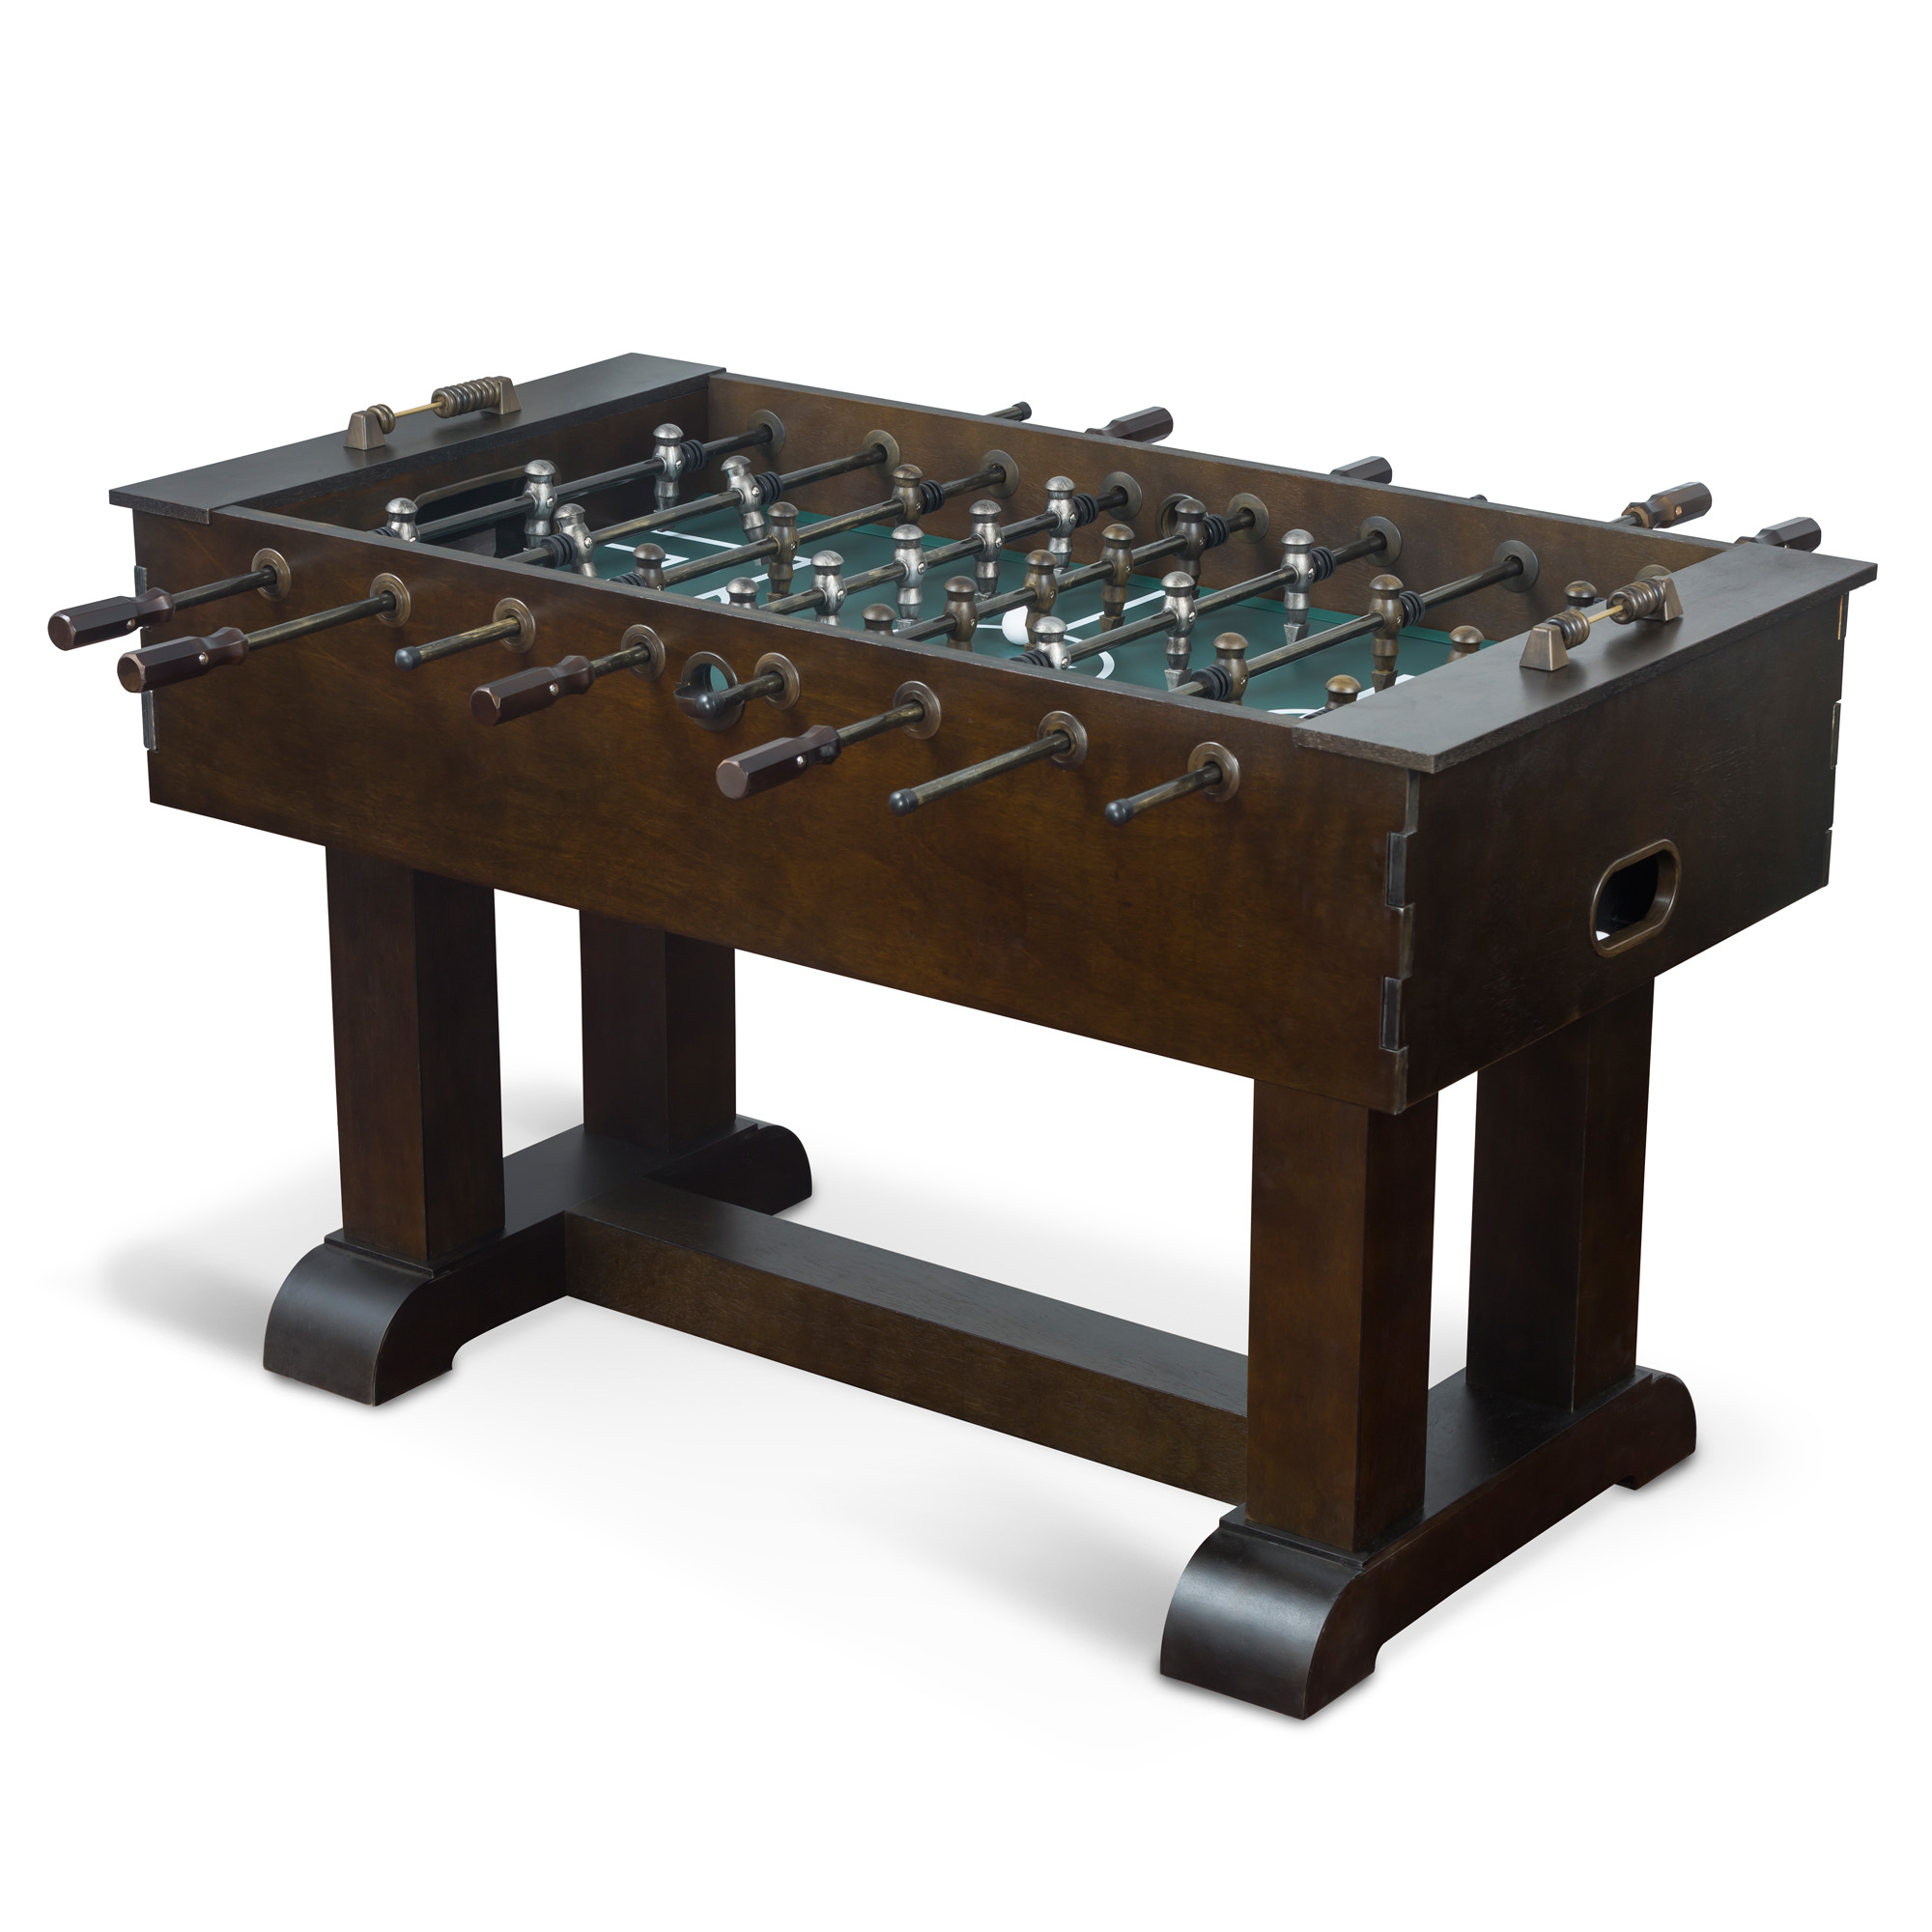 Classic Sport Durango Foosball Table, Brown, Official Competition Size (56.75" L x 29.25" W x 34.50" H. ) - image 1 of 11